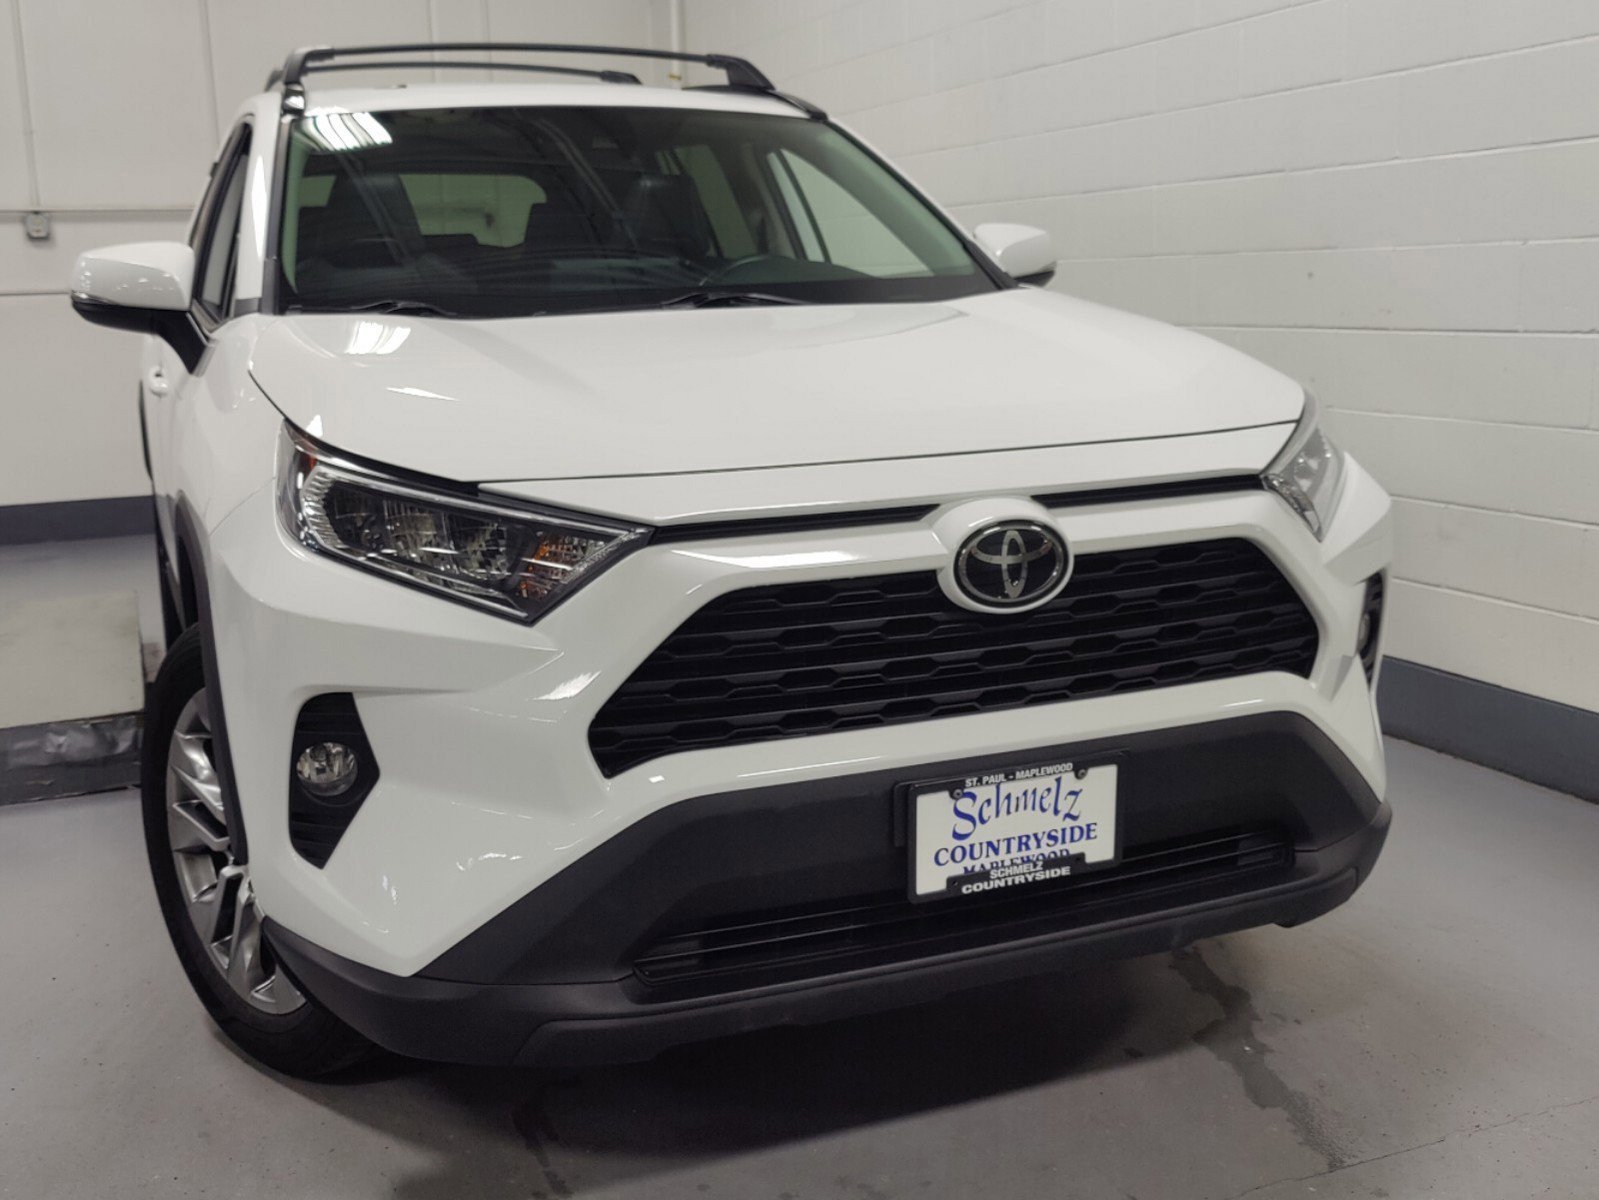 Used 2020 Toyota RAV4 XLE Premium with VIN 2T3A1RFV7LW098145 for sale in Maplewood, Minnesota